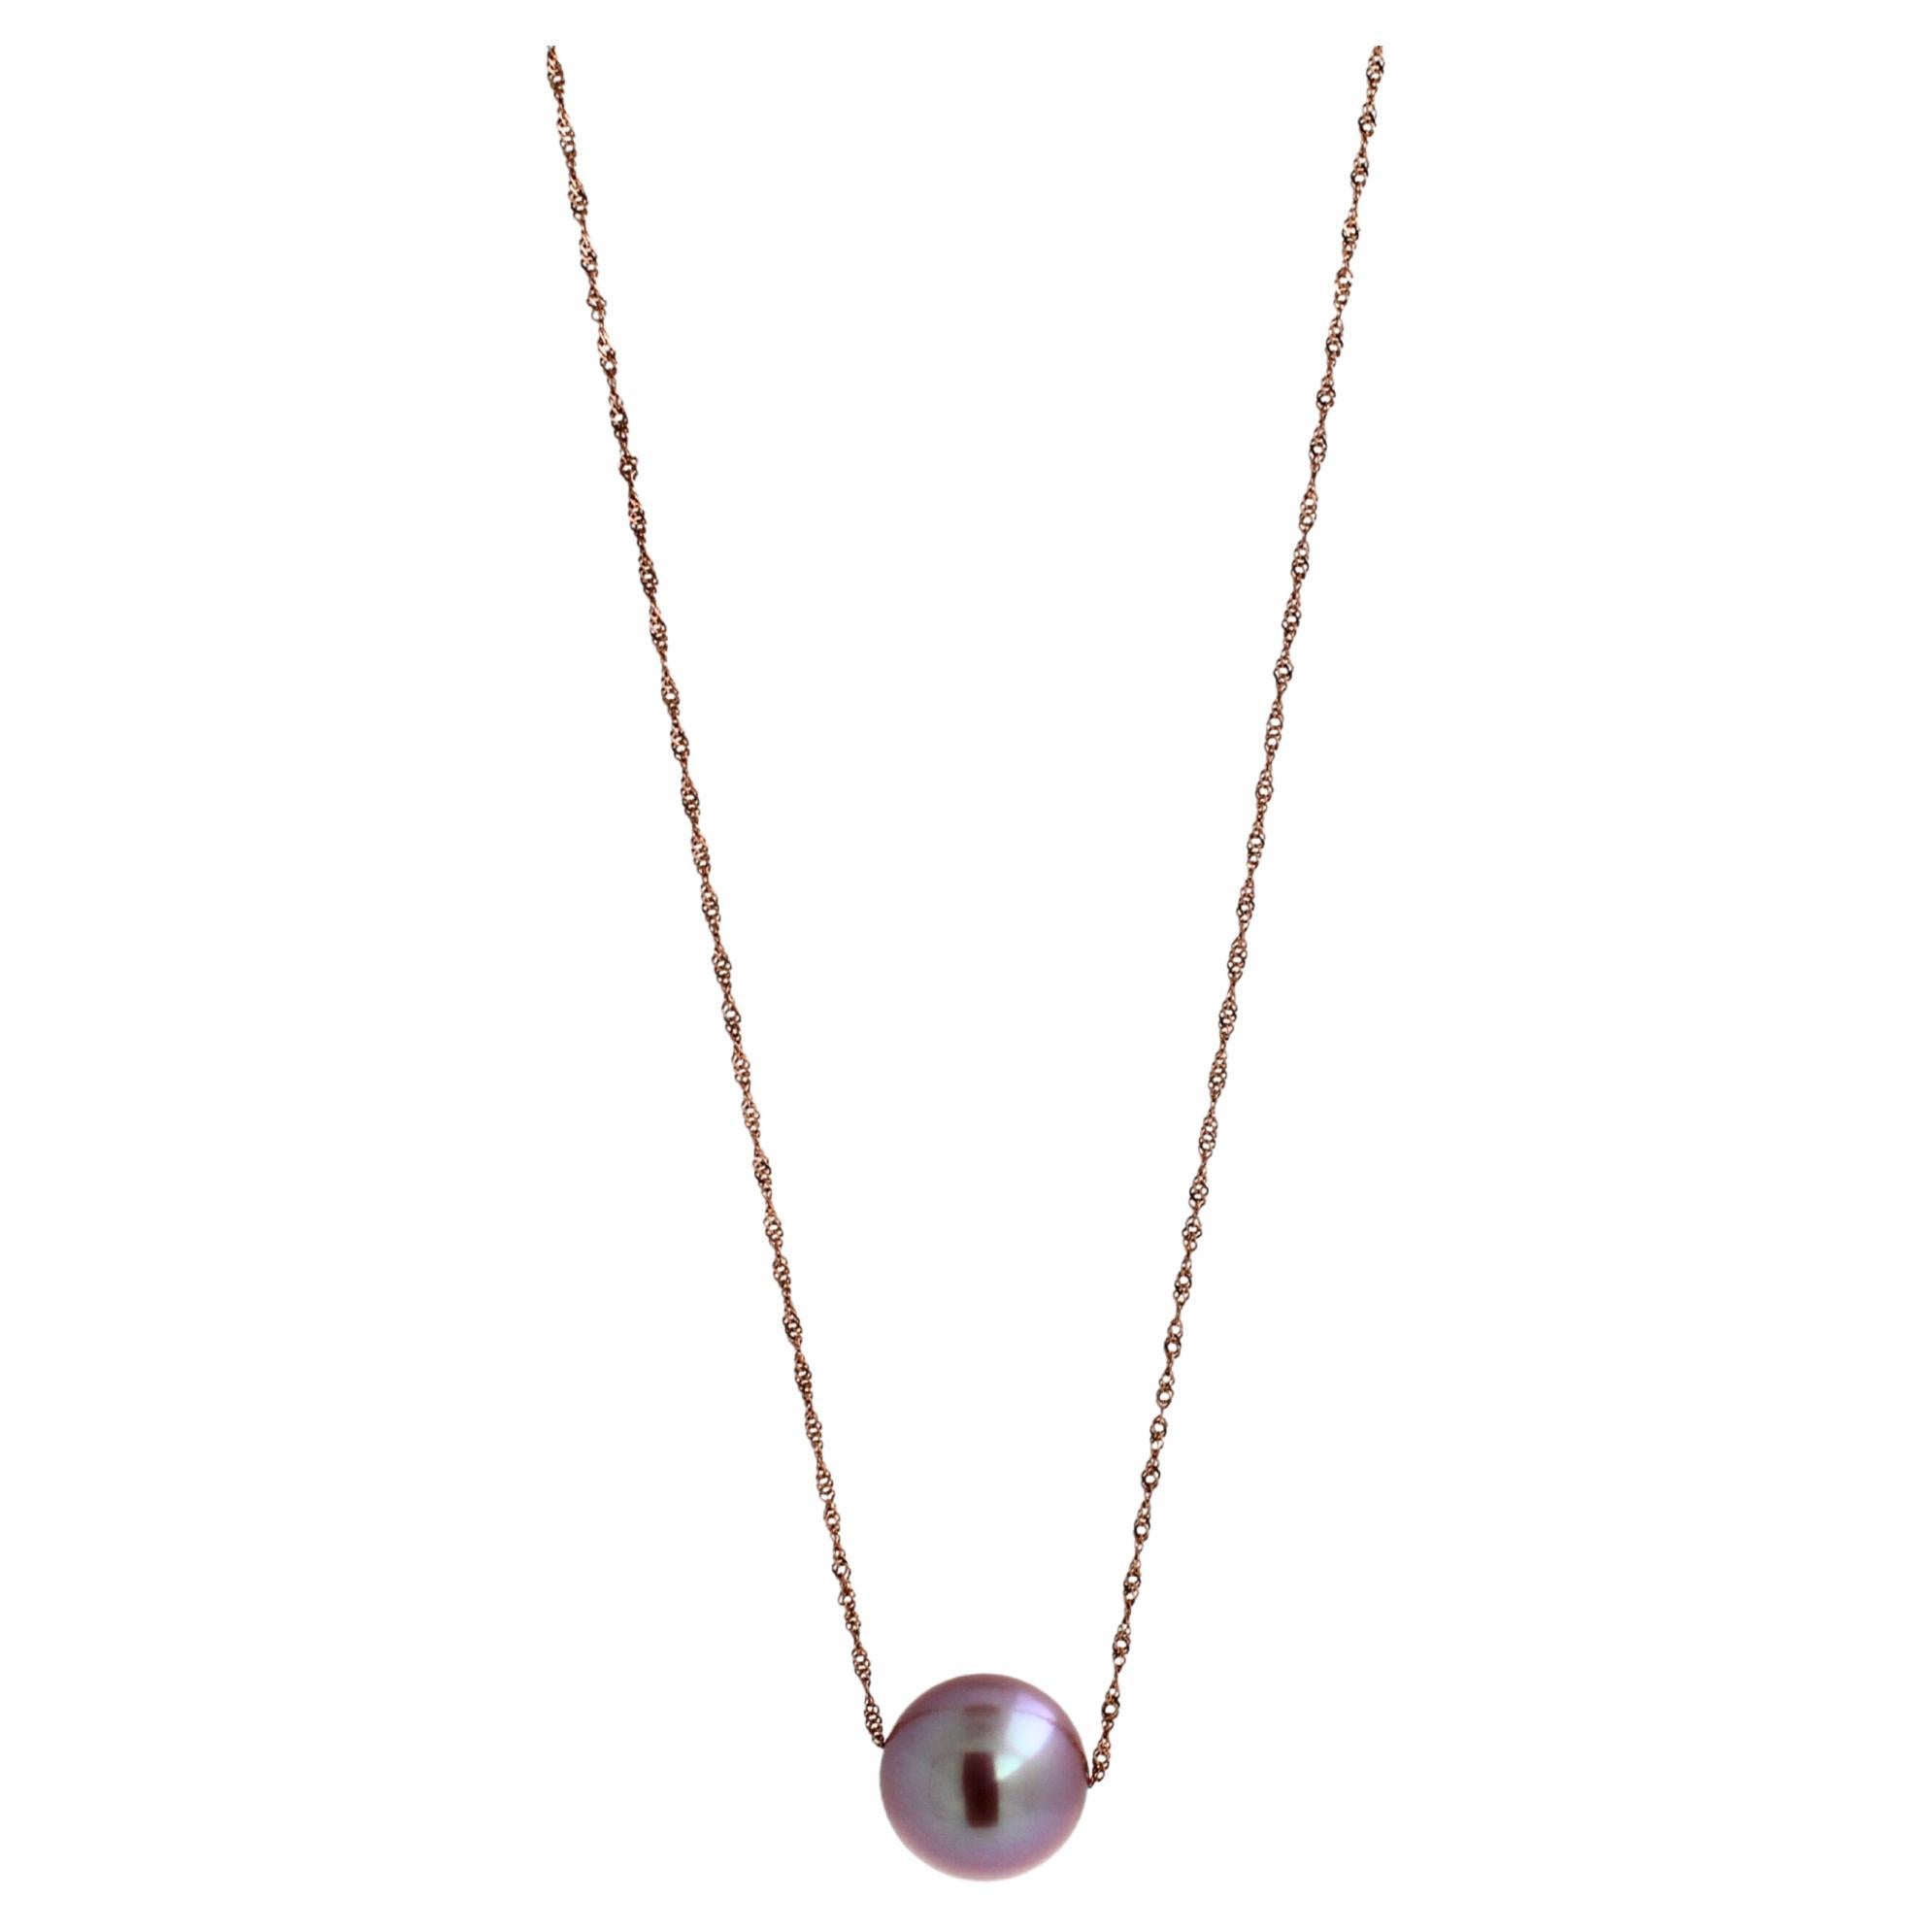 Pink Pearl 
14 Karat Rose Gold
Adjustable Length High-Finish Chain
High Quality Pearl with Beautiful Shine, Luster, Size & Brilliance
Classic, Minimalistic Design 